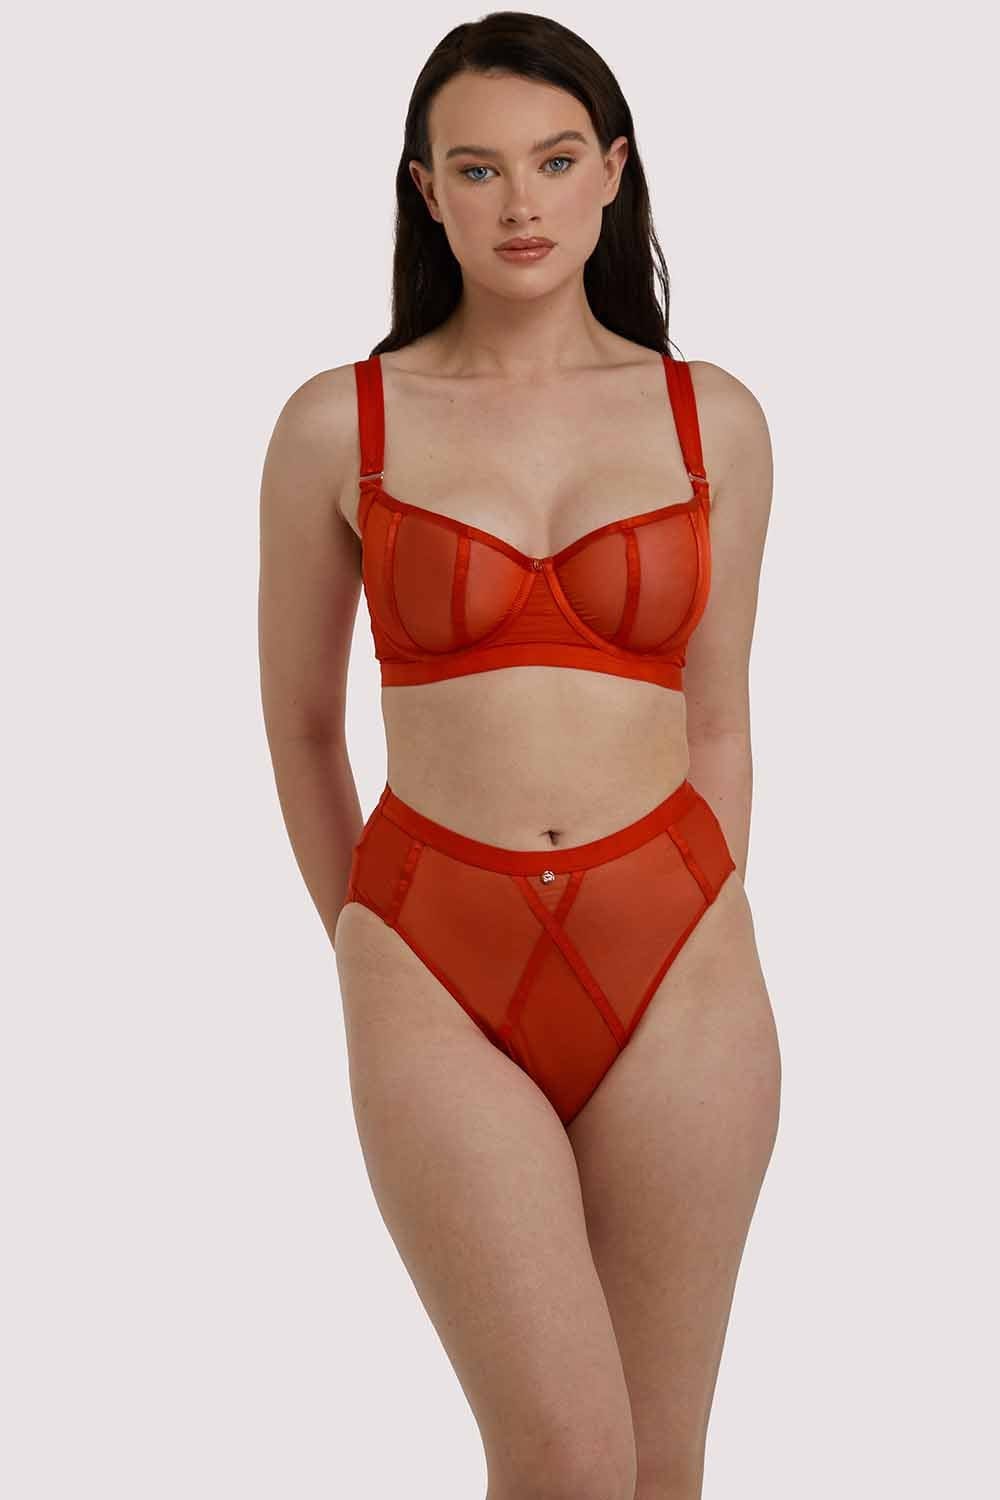 Sheer Chic Flame Red Bra